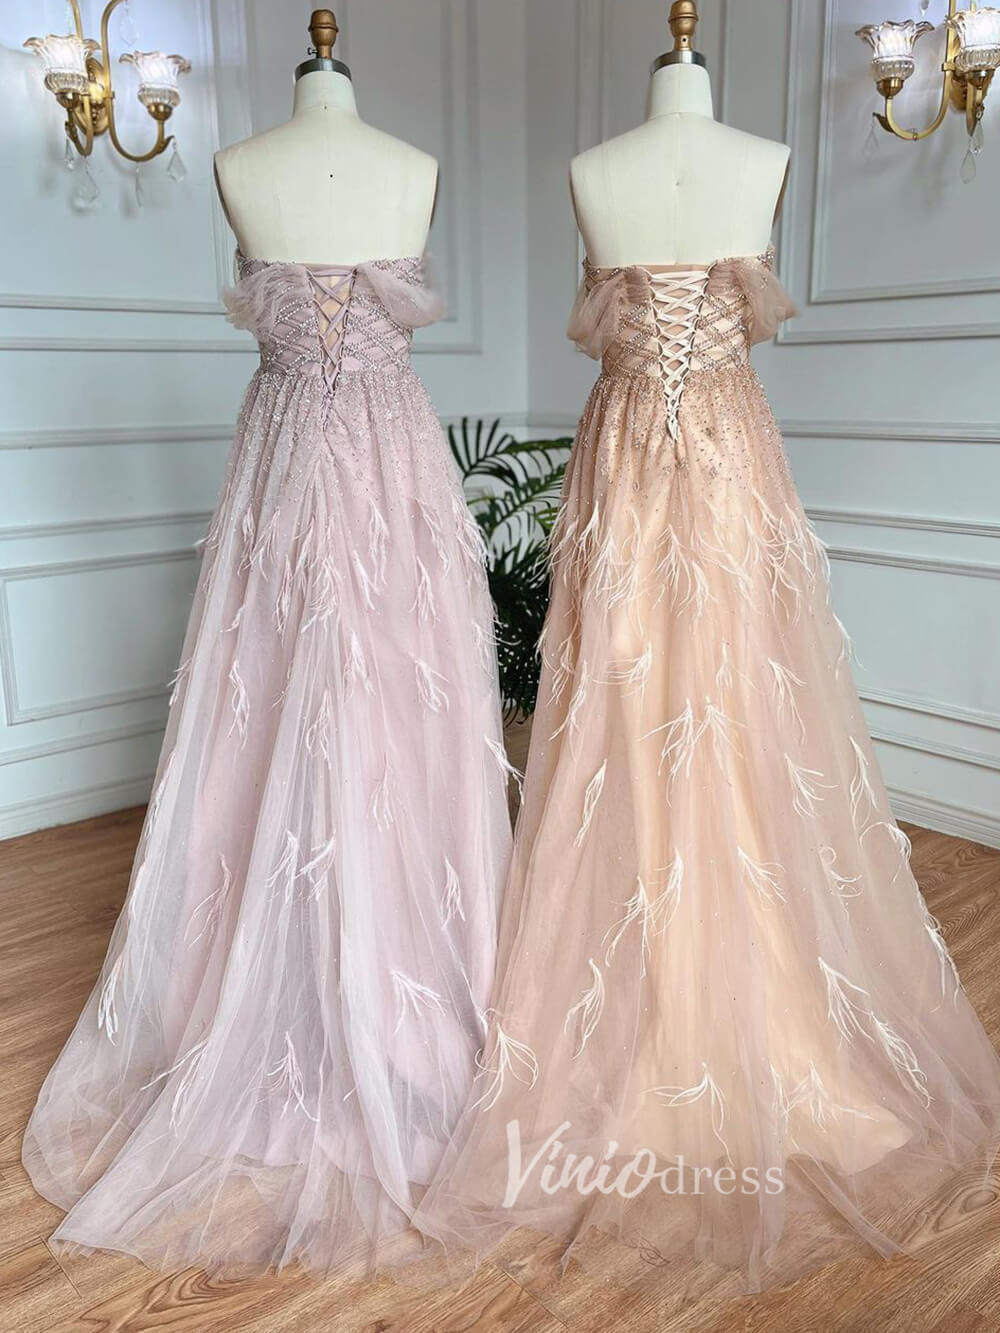 Beaded Feather Prom Dresses A-line Tulle Evening Gowns 20036-prom dresses-Viniodress-Viniodress